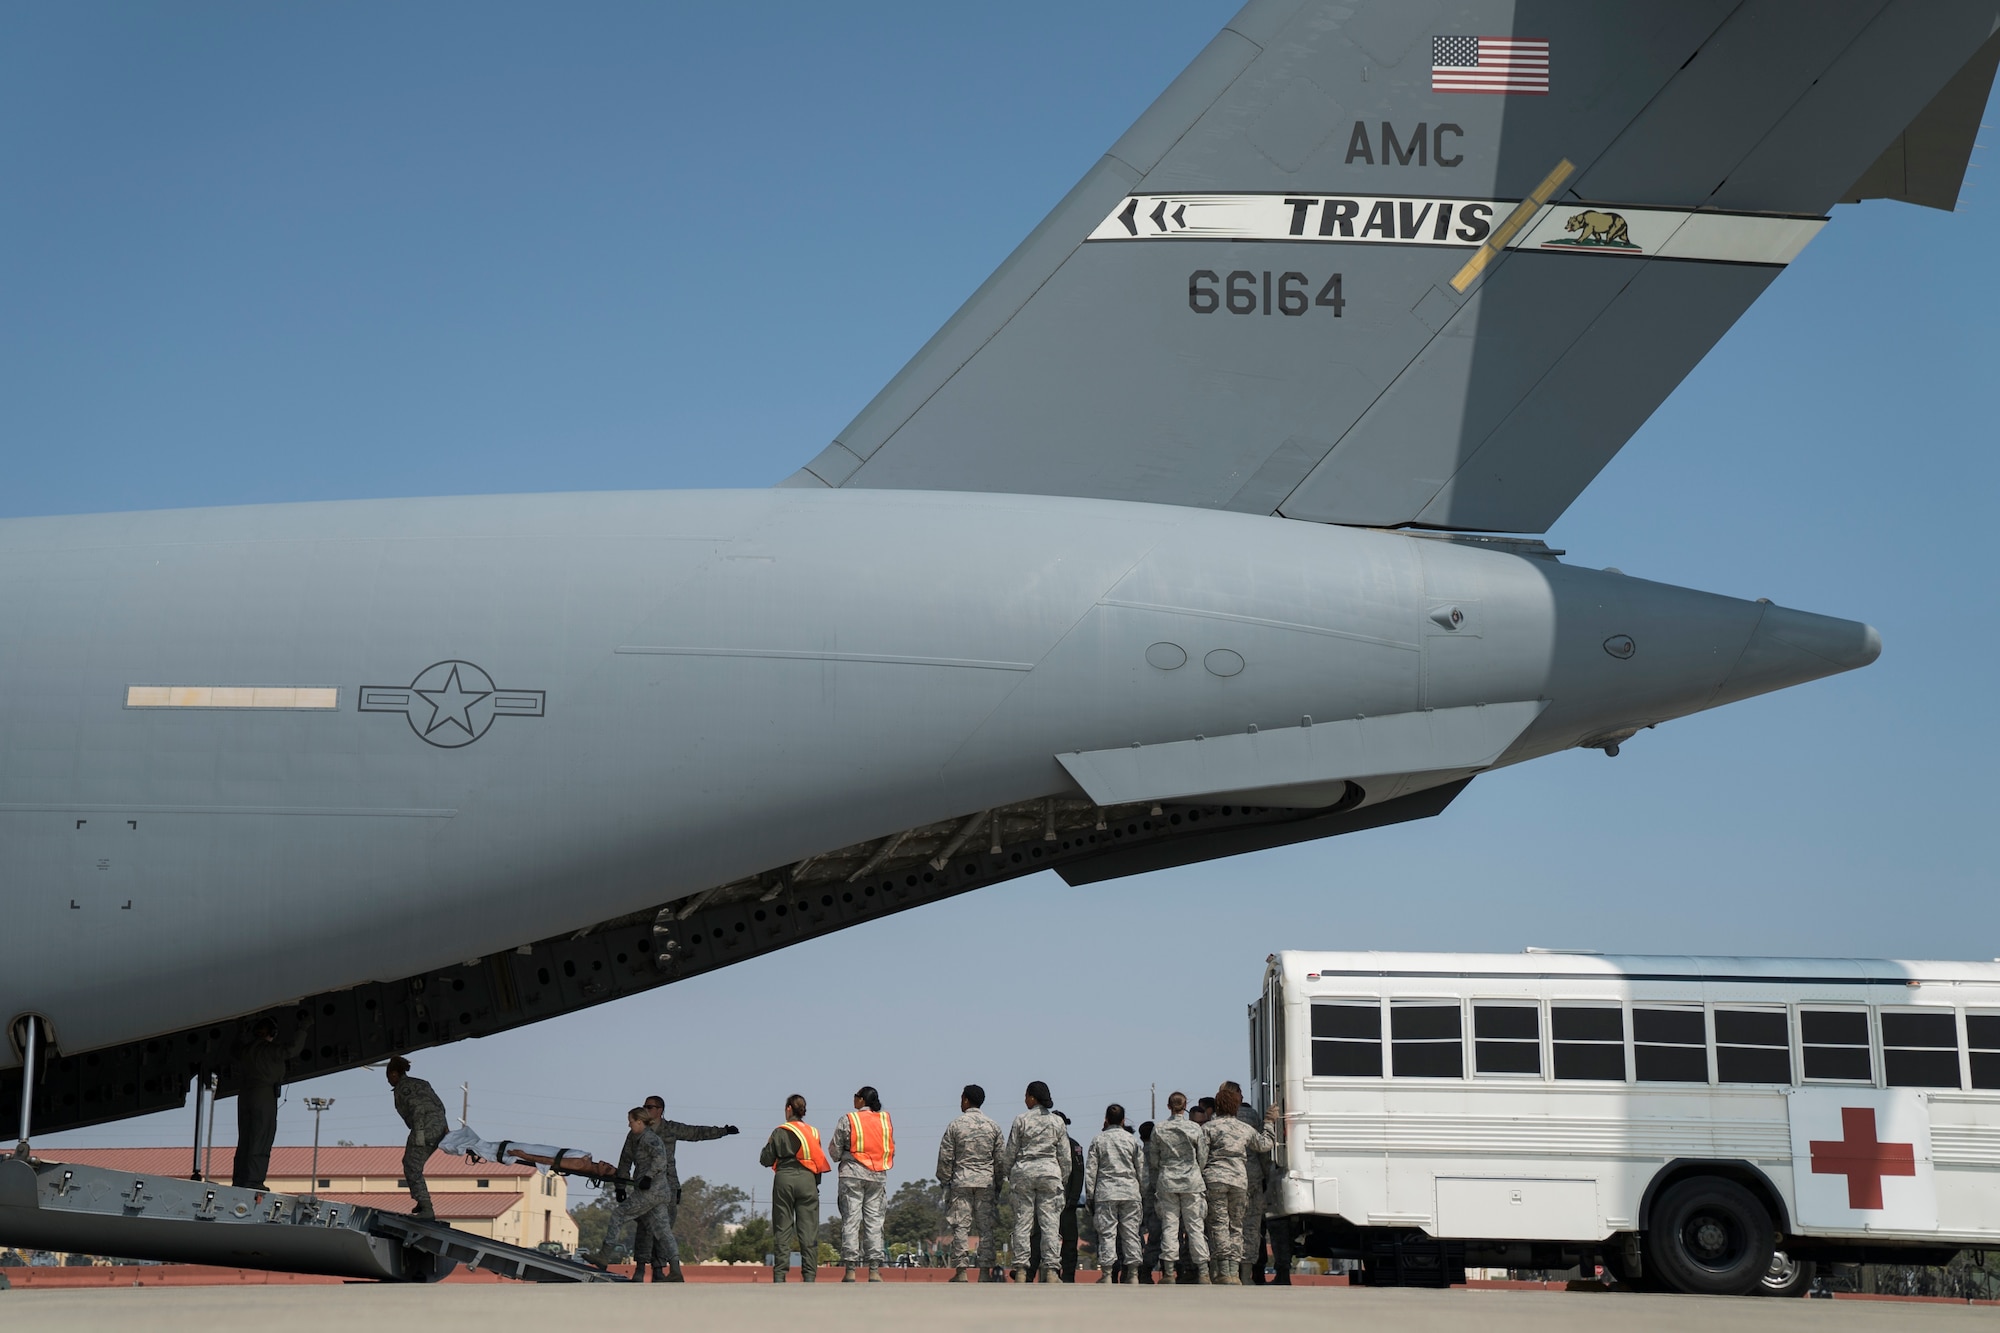 U.S. Air Force medical personnel load simulated patients from an ambulance bus onto a C-17 Globemaster III during Exercise Ultimate Caduceus 2018 at Travis Air Force Base, California, Aug. 23, 2018. Ultimate Caduceus 2018 is an annual patient movement exercise designed to test the ability of U.S. Transportation Command to provide medical evacuation. (U.S. Air Force photo by Jamal D. Sutter)